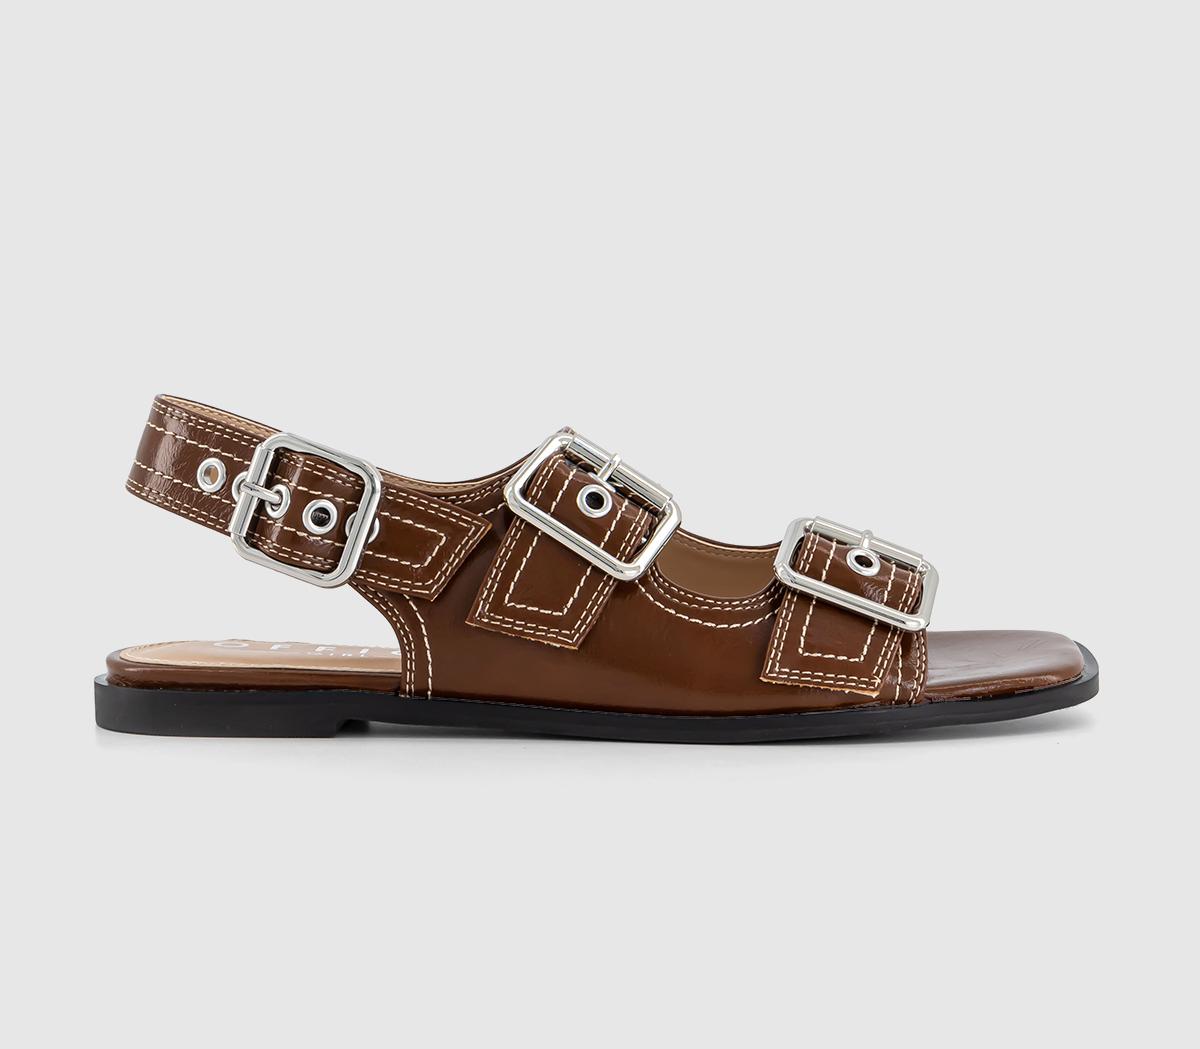 OFFICEStealth Double Buckle Contrast Stitch SandalsBrown